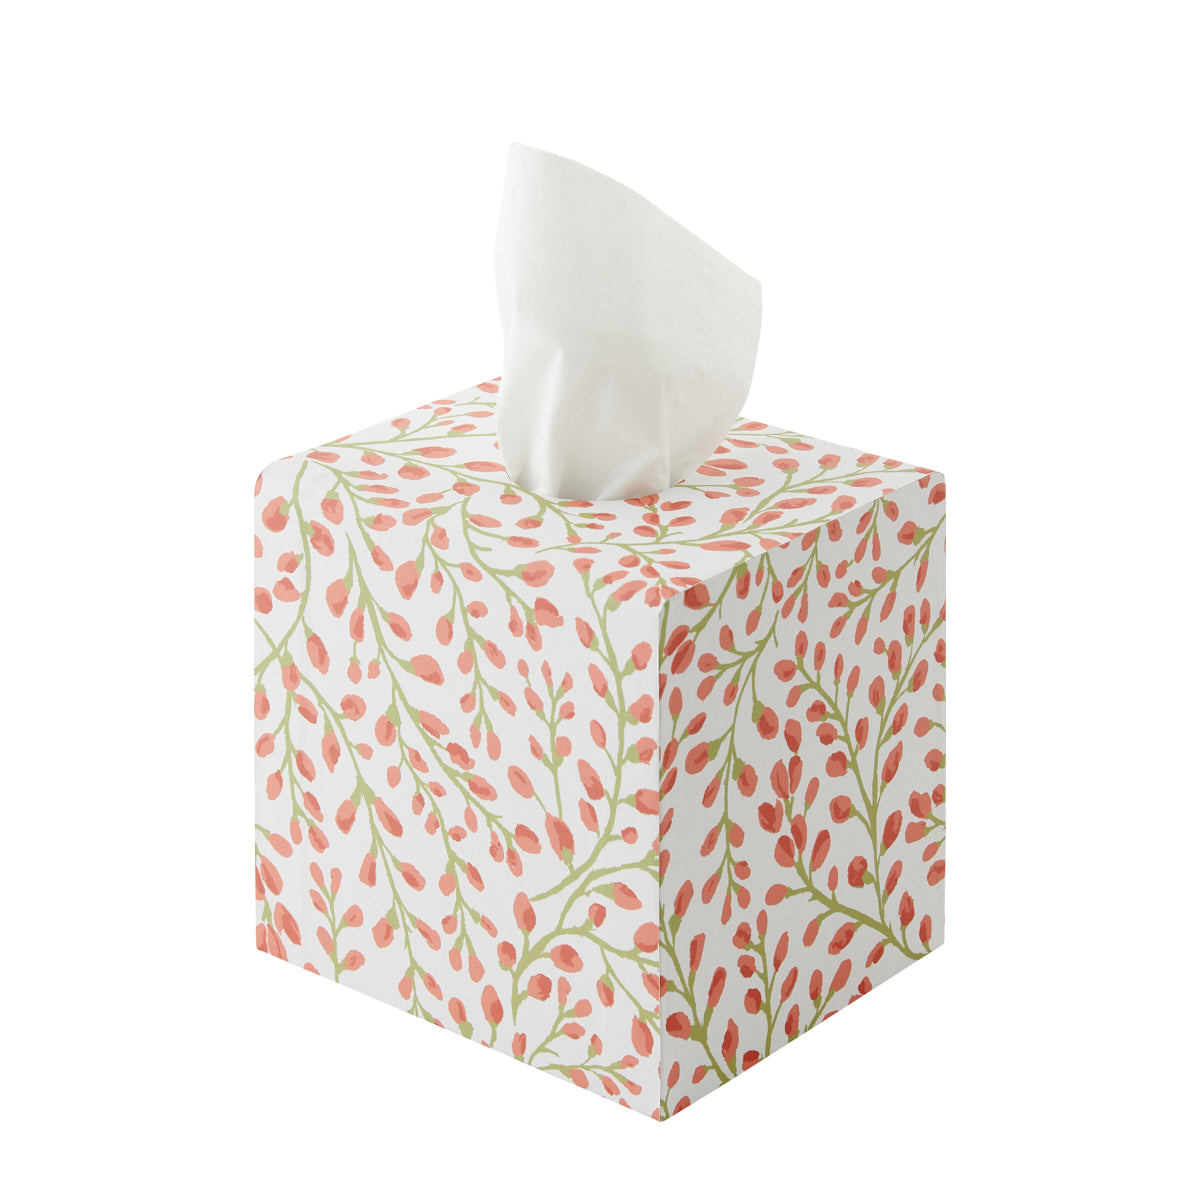 Nina Campbell Tissue Box All Over Buds - Coral